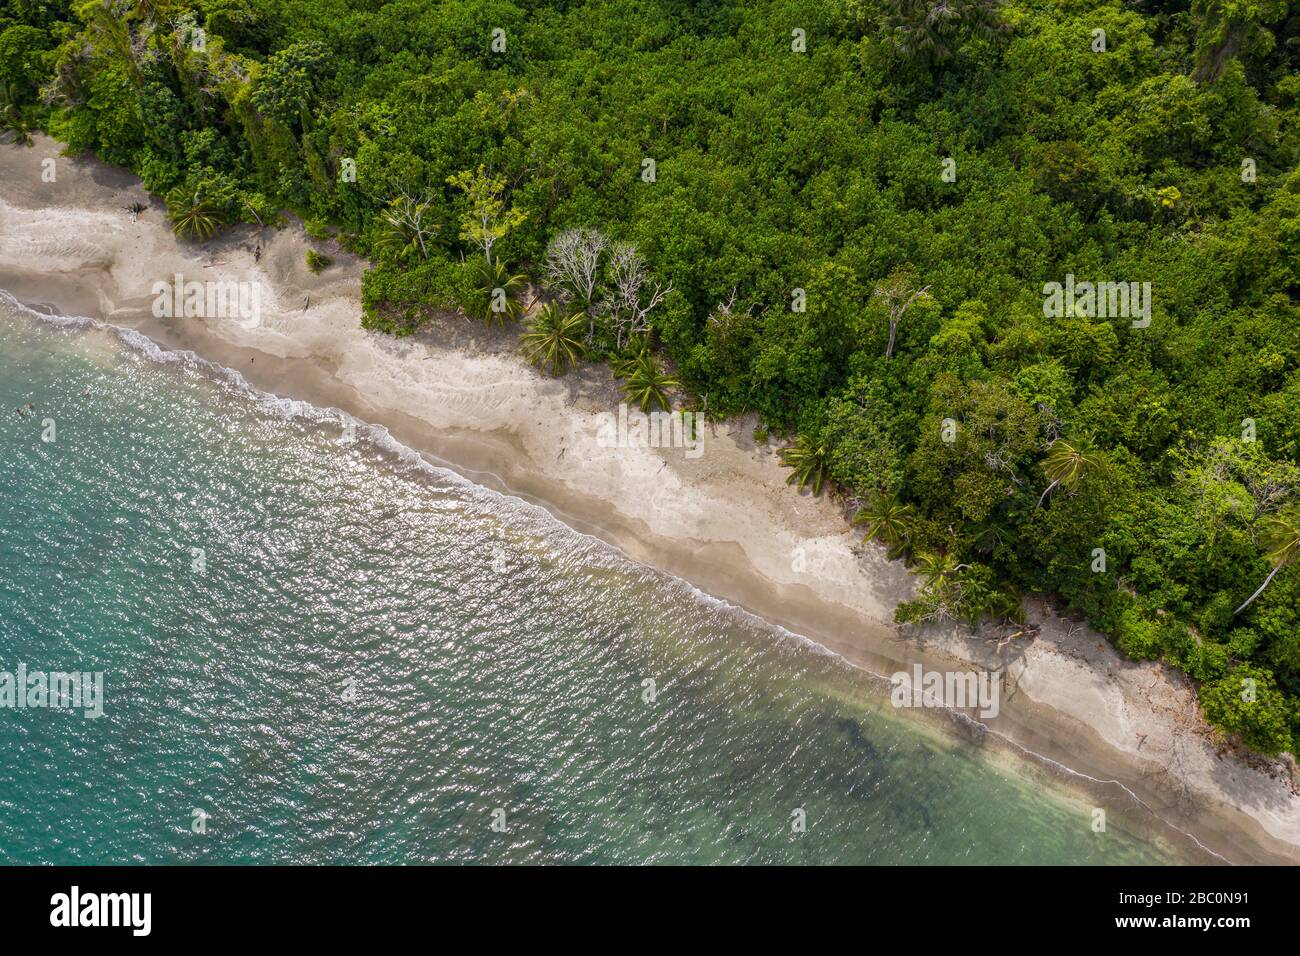 Aerial view of Cahuita National Park along the southern Caribbean coast of Costa Rica. Stock Photo